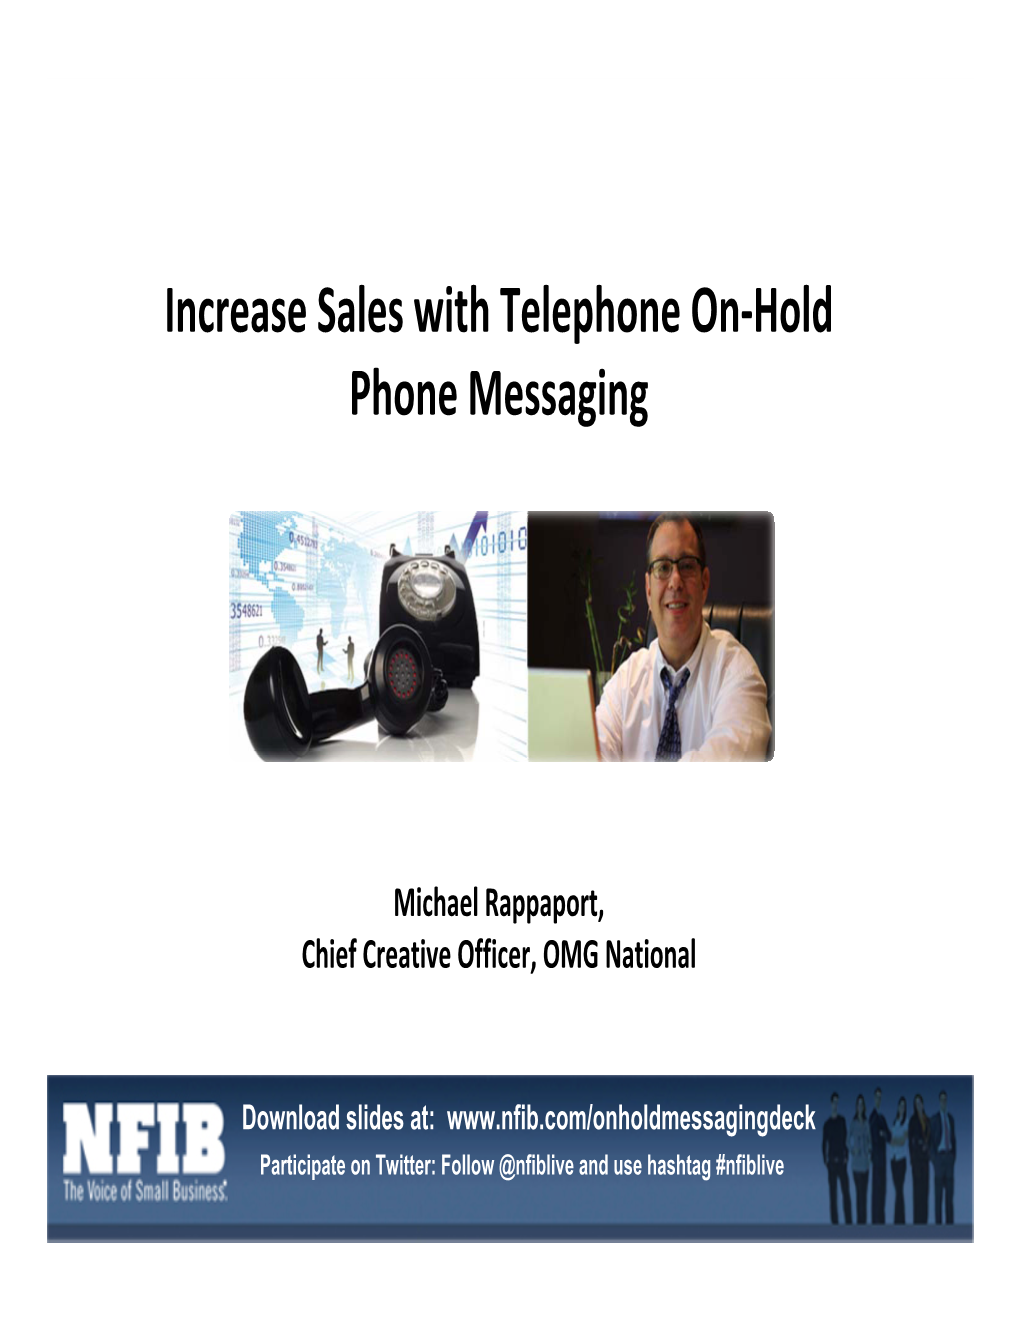 Increase Sales with Telephone On-Hold Phone Messaging